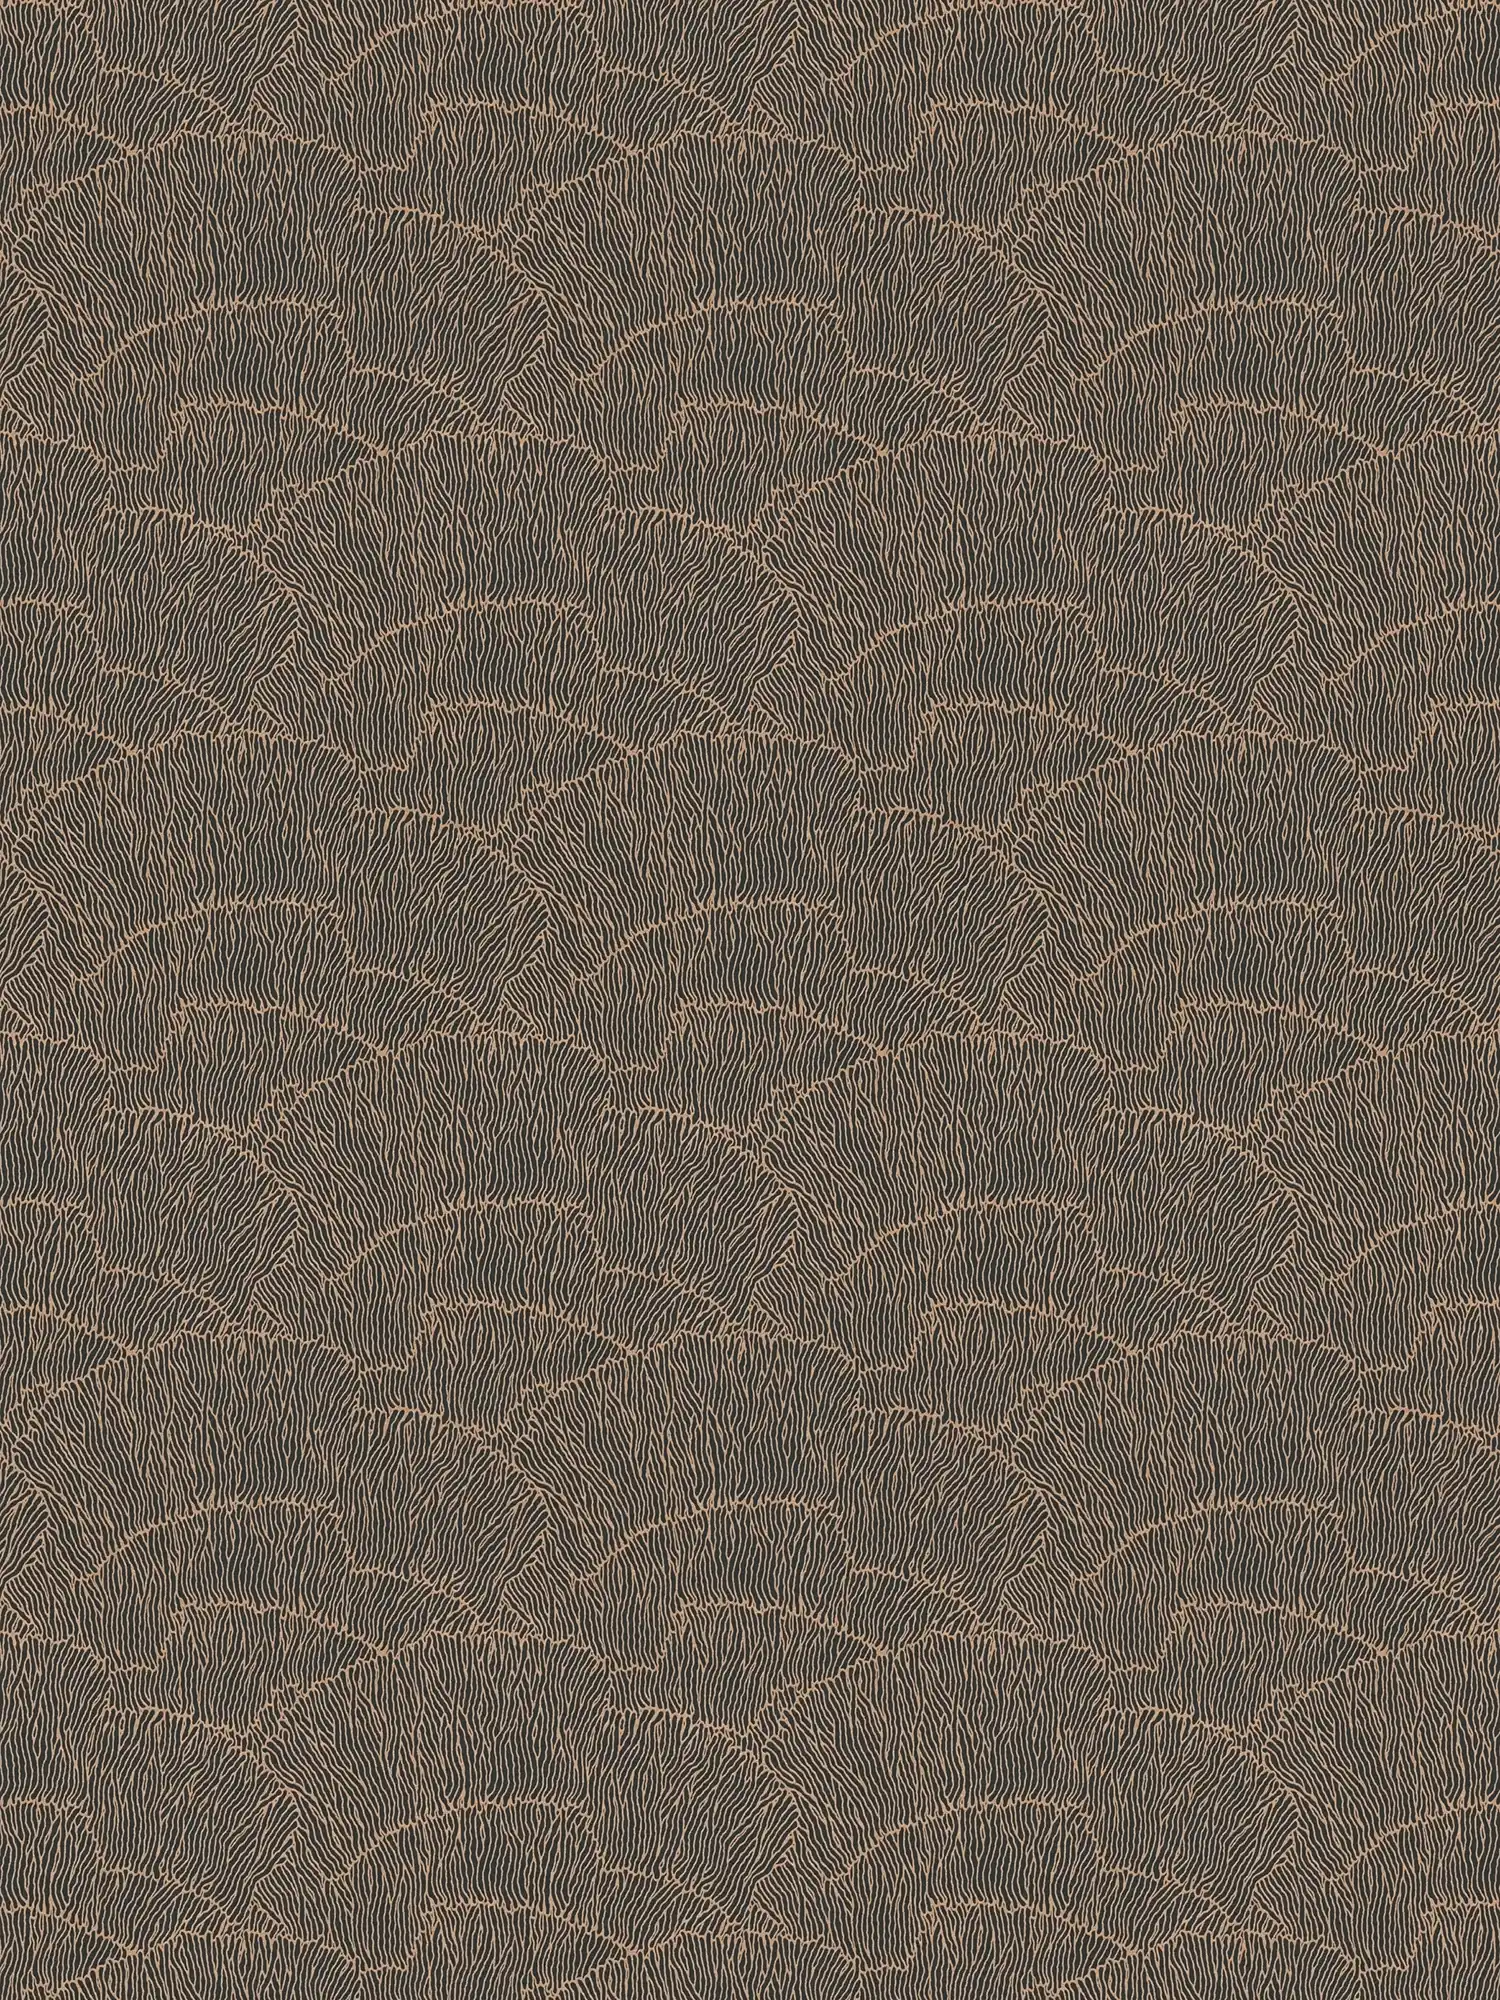 Non-woven wallpaper with line pattern - black, gold, metallic
